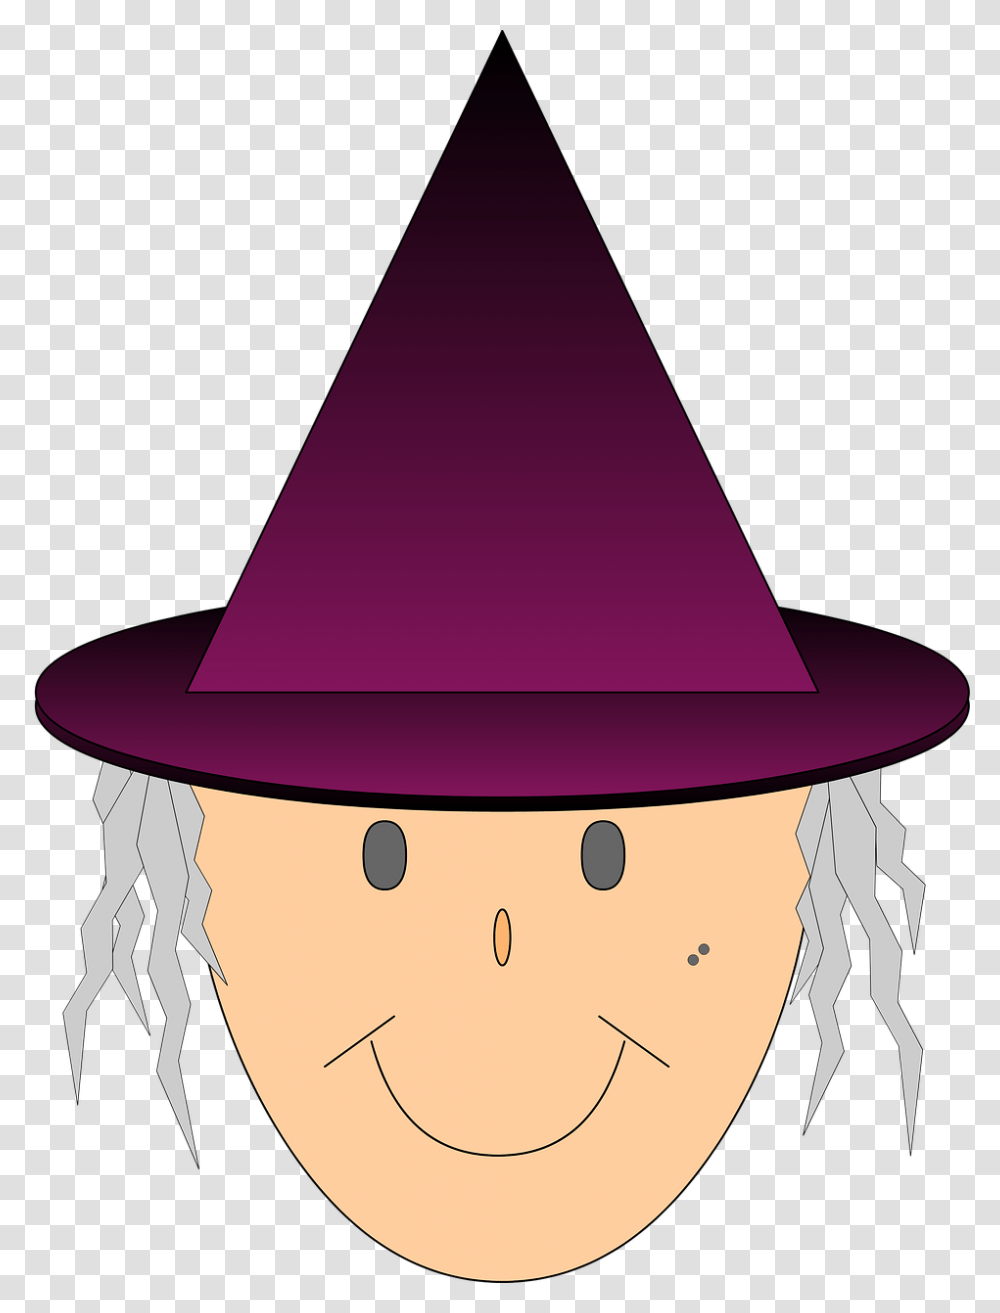 Witch Wizard Helloween Witch's Hat Illustration Small Pink Halloween Hat, Apparel, Lamp, Party Hat Transparent Png